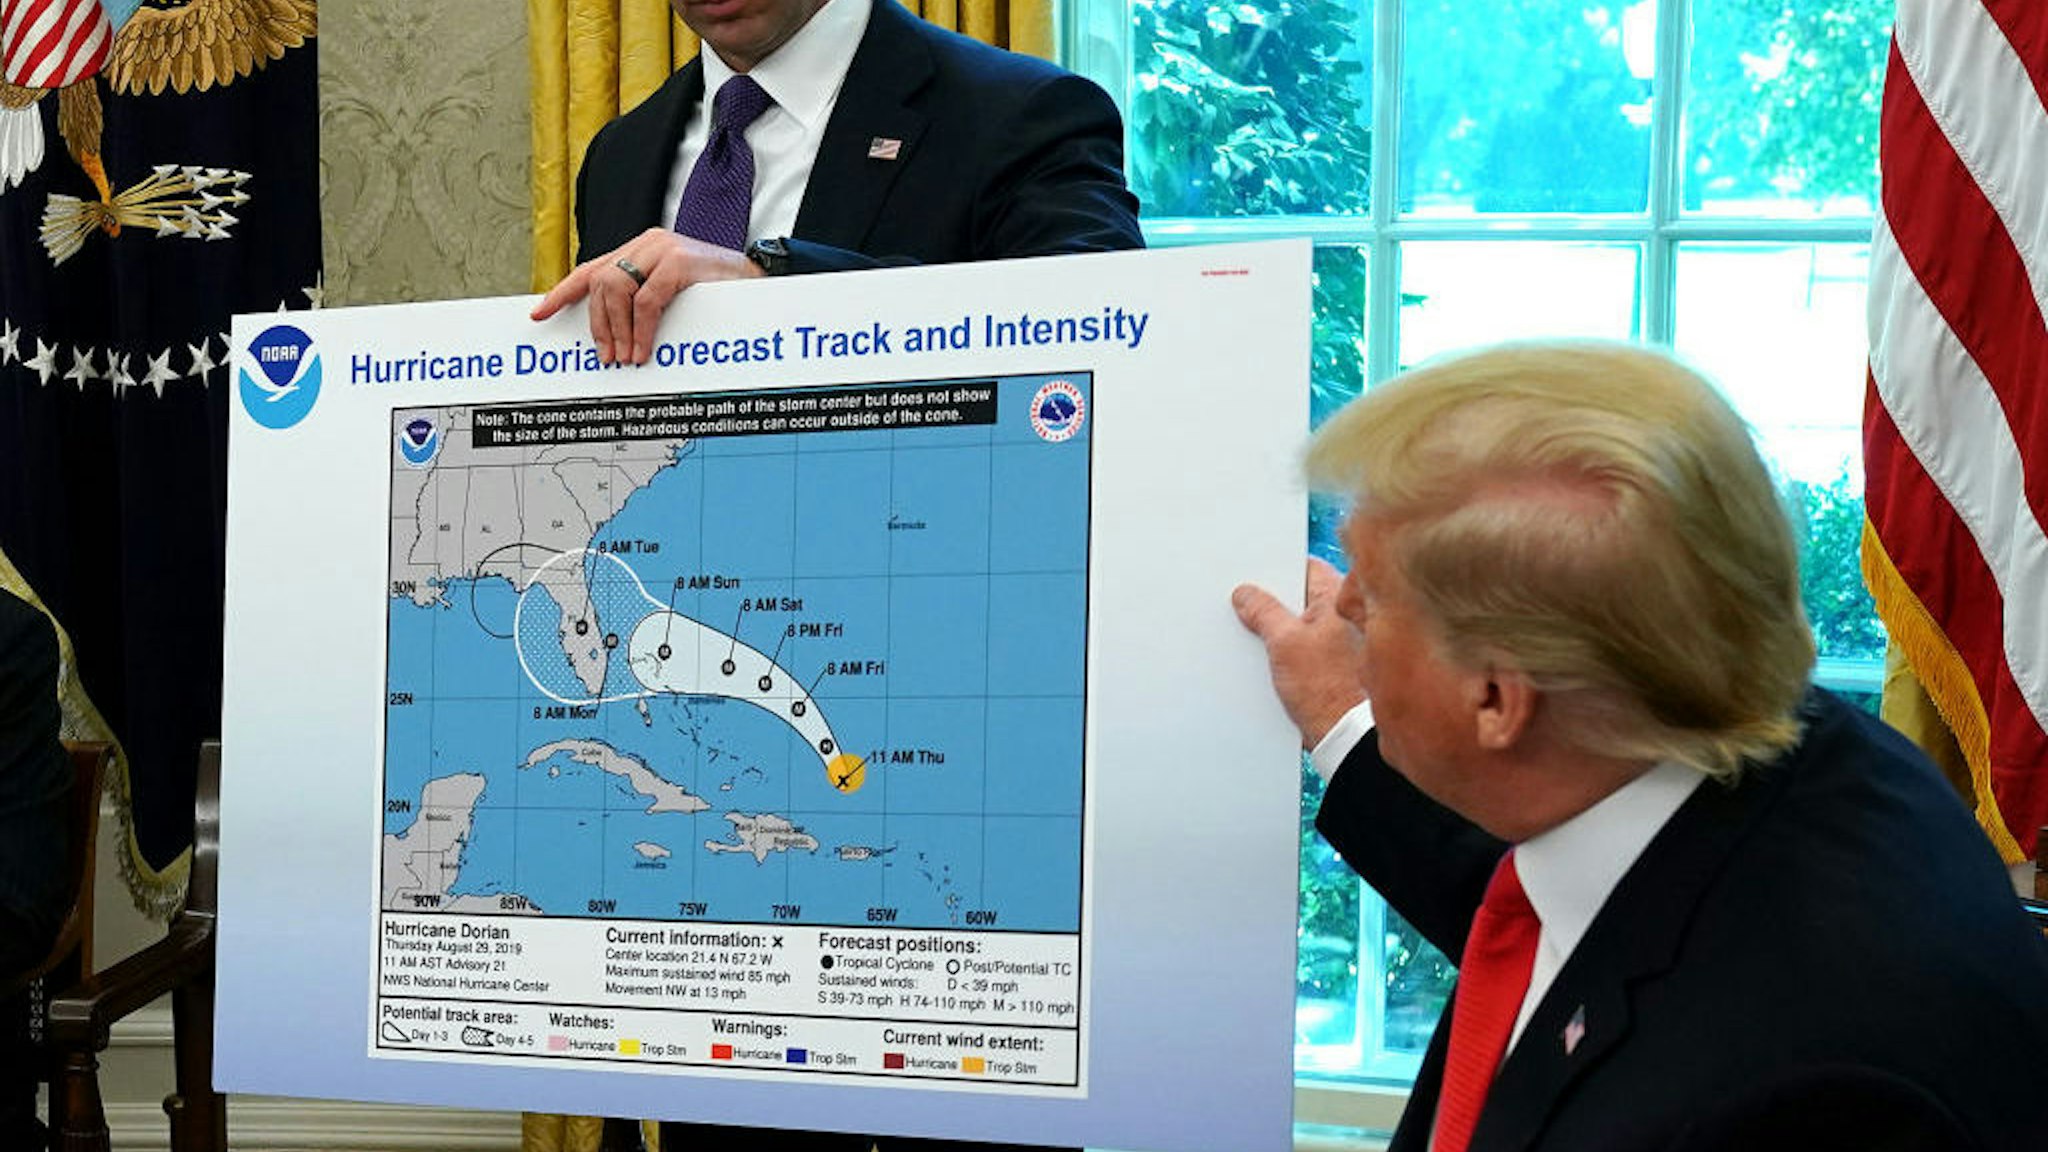 U.S. President Donald Trump (R) references a map held by acting Homeland Security Secretary Kevin McAleenan while talking to reporters following a briefing from officials about Hurricane Dorian in the Oval Office at the White House September 04, 2019.